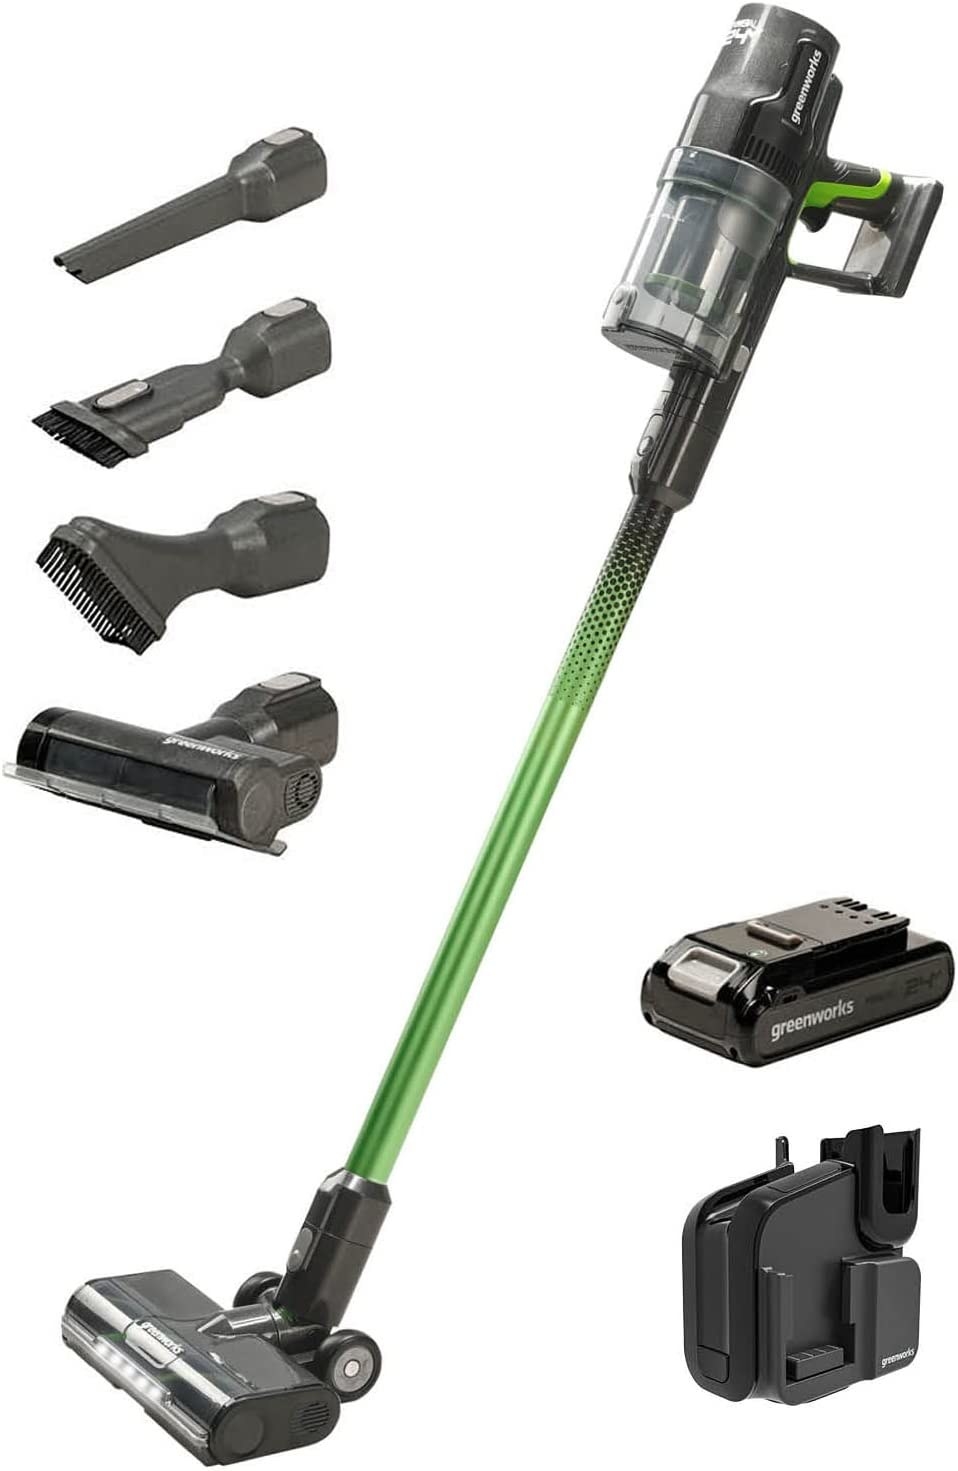 Greenworks 24V Brushless Cordless Stick Vacuum in lime green with a white background